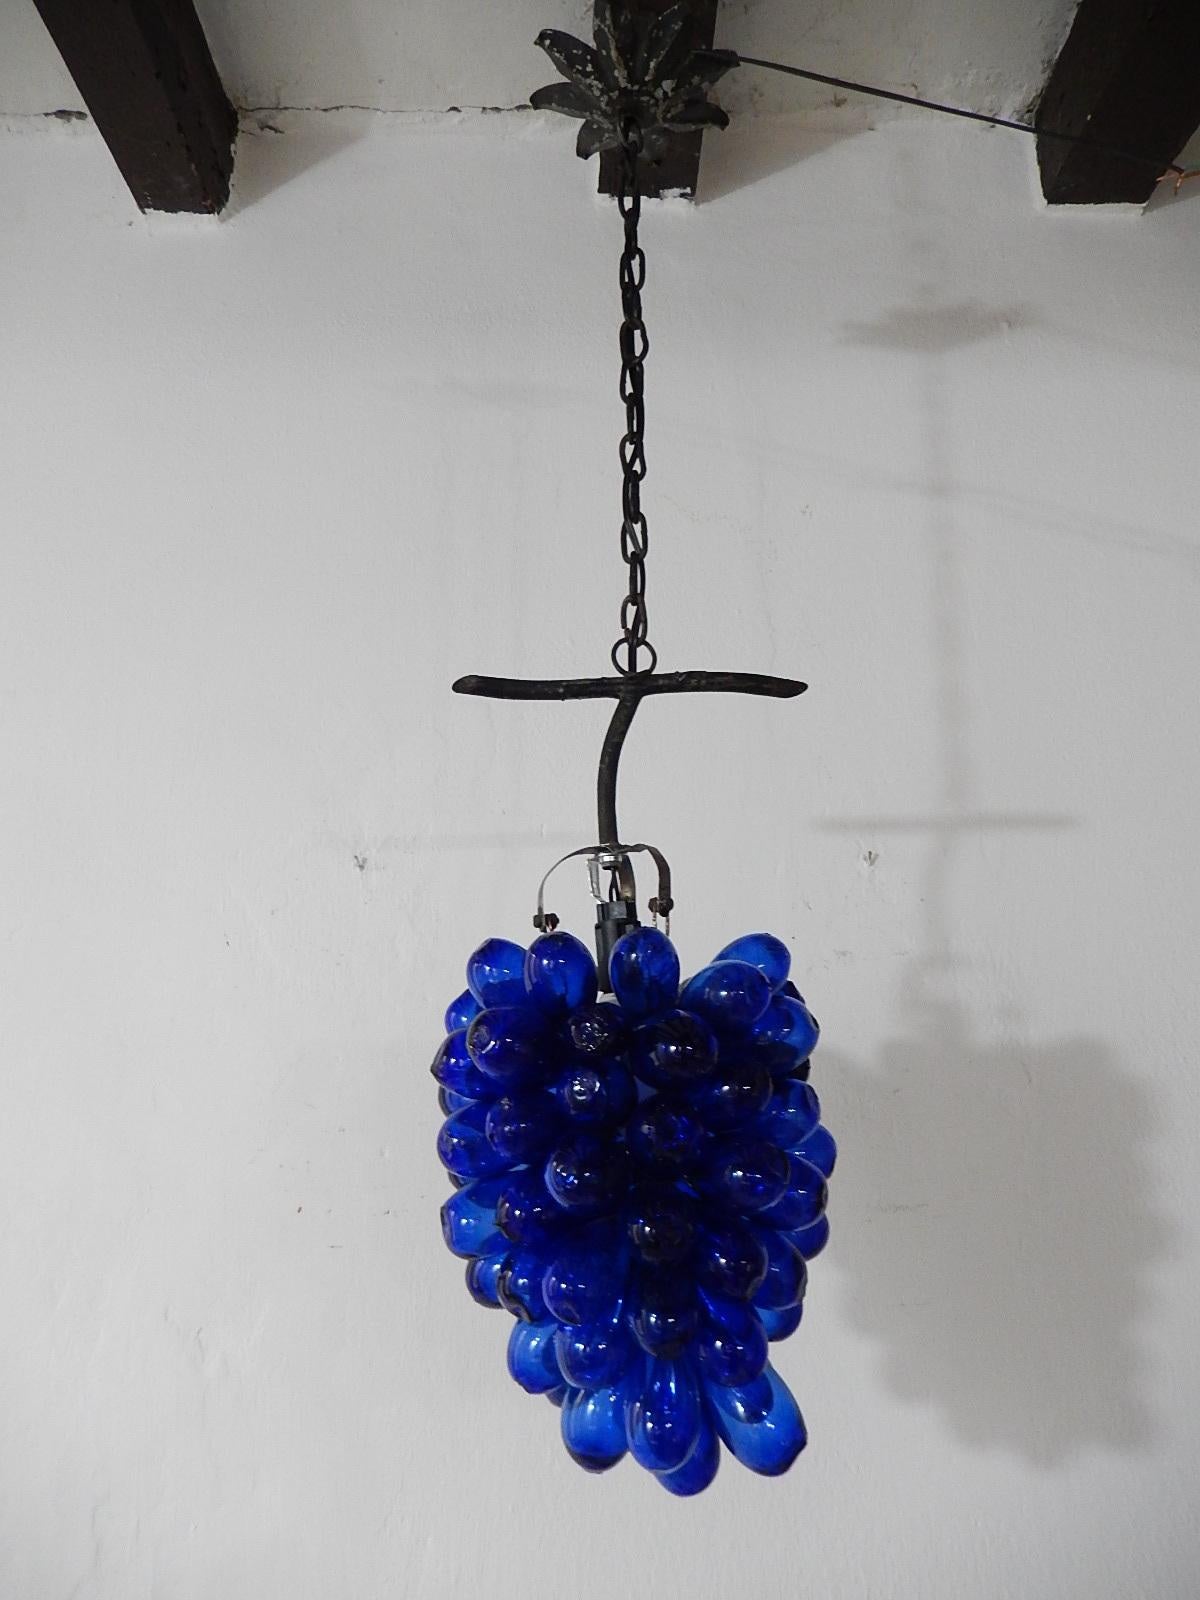 Housing one-light. Rewired and ready to hang. Rare big mouth blown cobalt Murano glass grape cluster drops. Adding another 14 inches of original chain and canopy. Free priority UPS shipping from Italy, no custom fees.